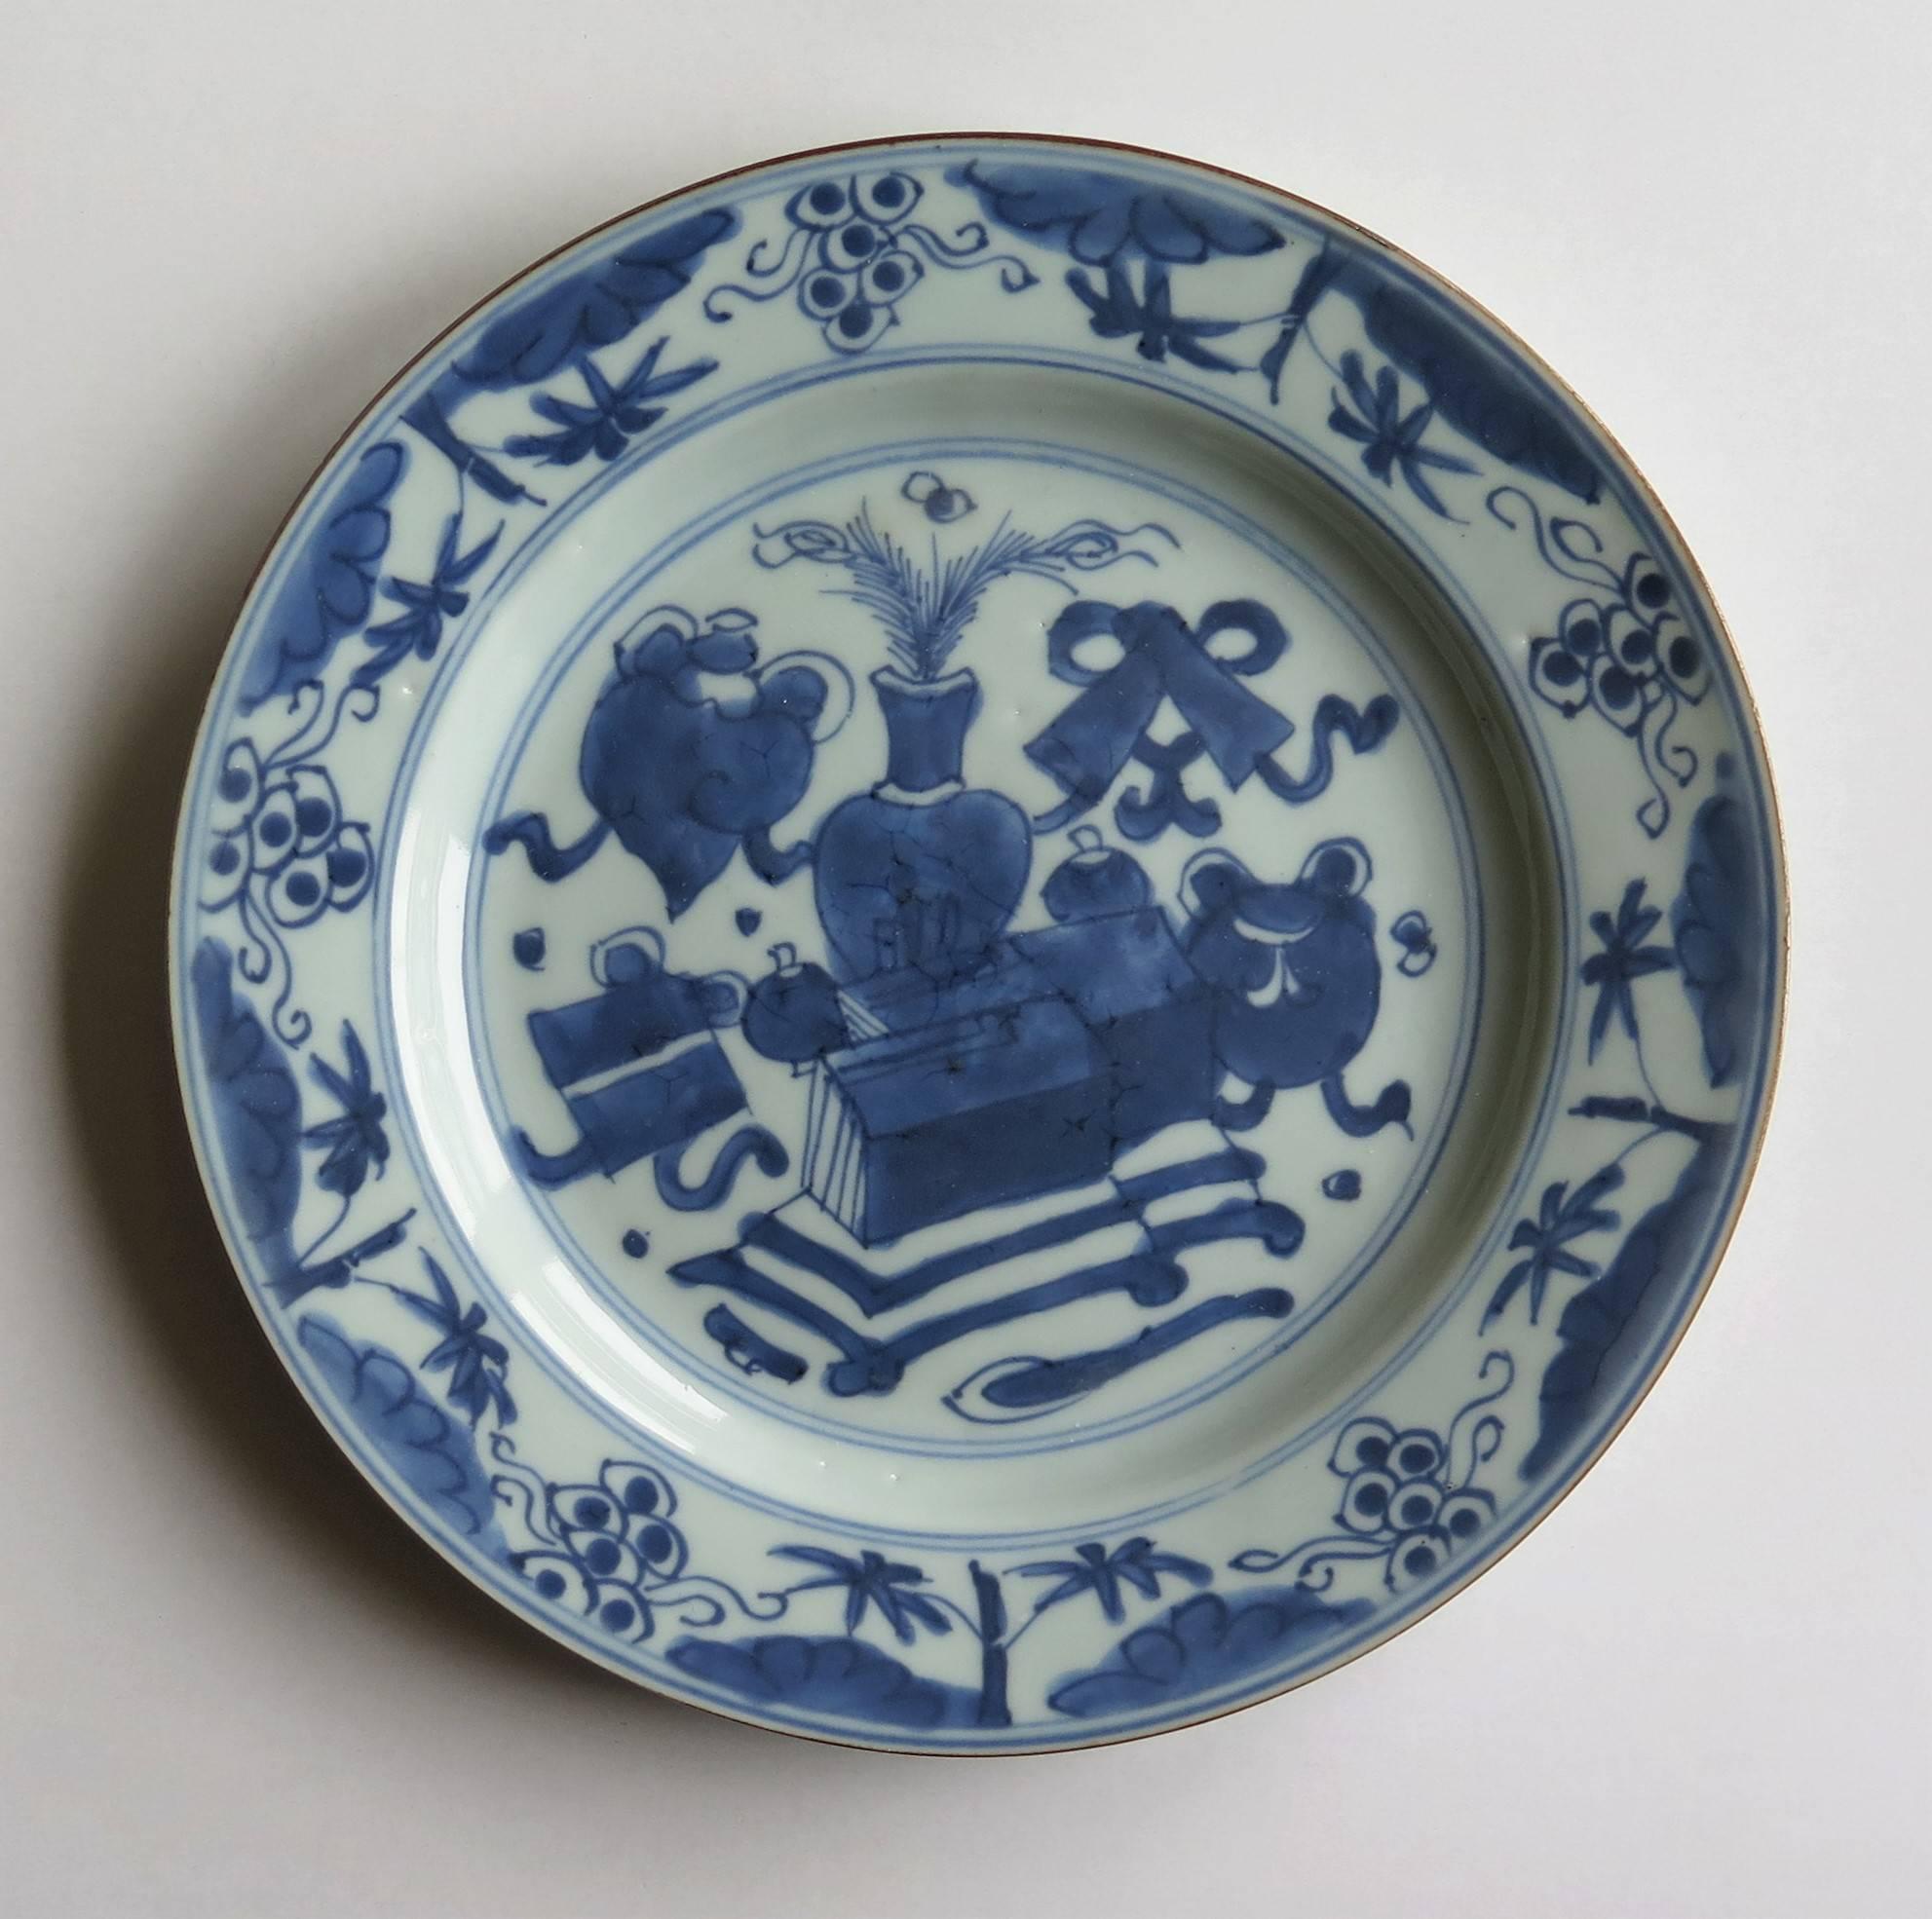 Hand-Painted Early 18th Century, Chinese Porcelain Plate, Vase and Symbols, Qing, circa 1735